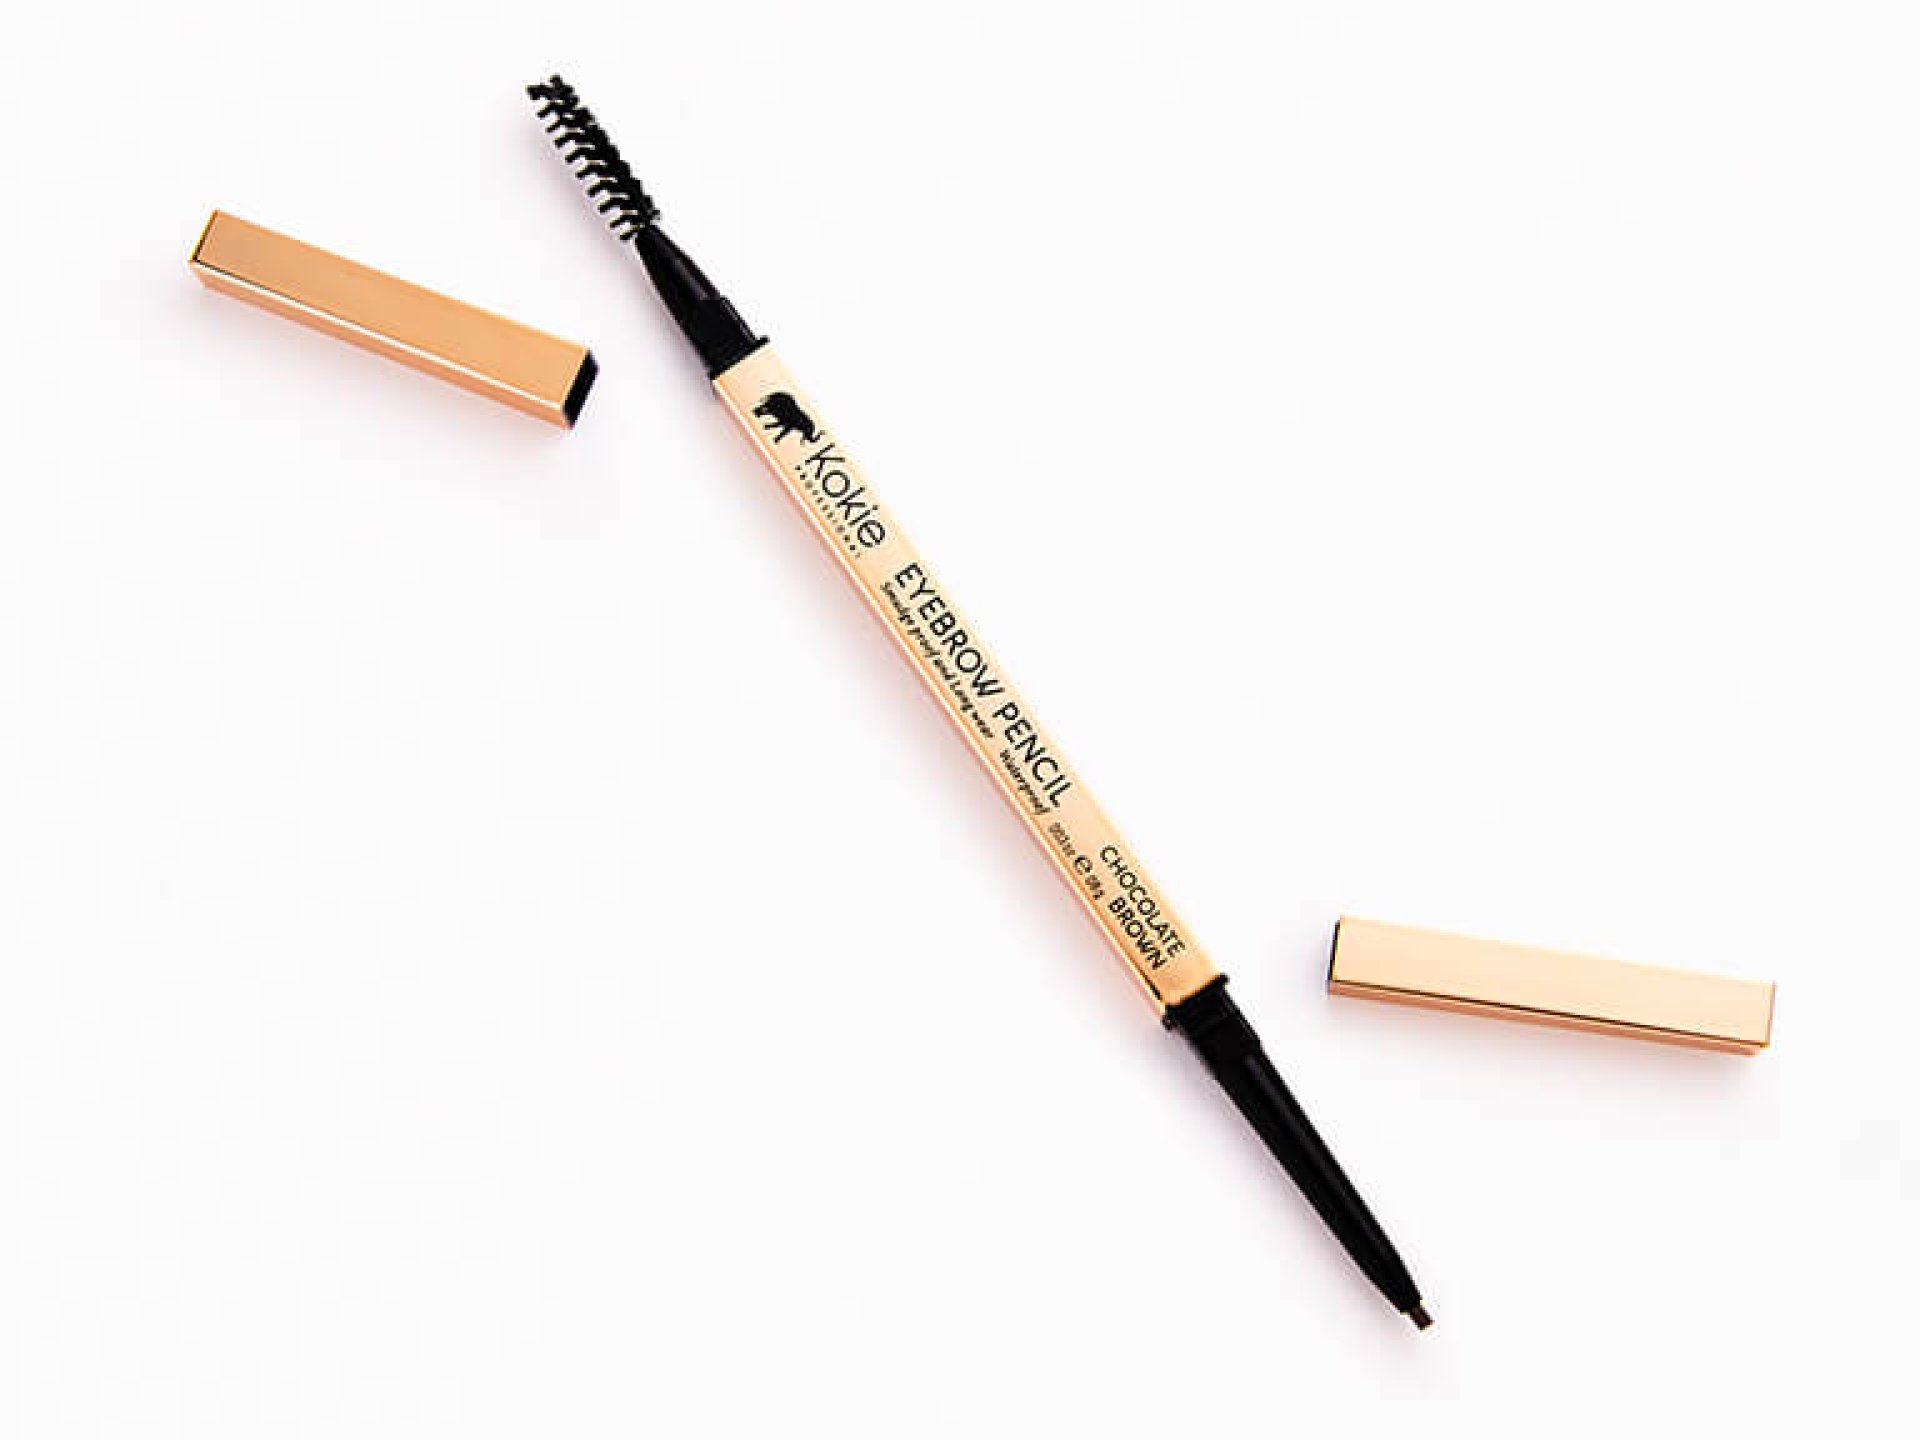 KOKIE PROFESSIONAL Brow Pencil in Chocolate Brown